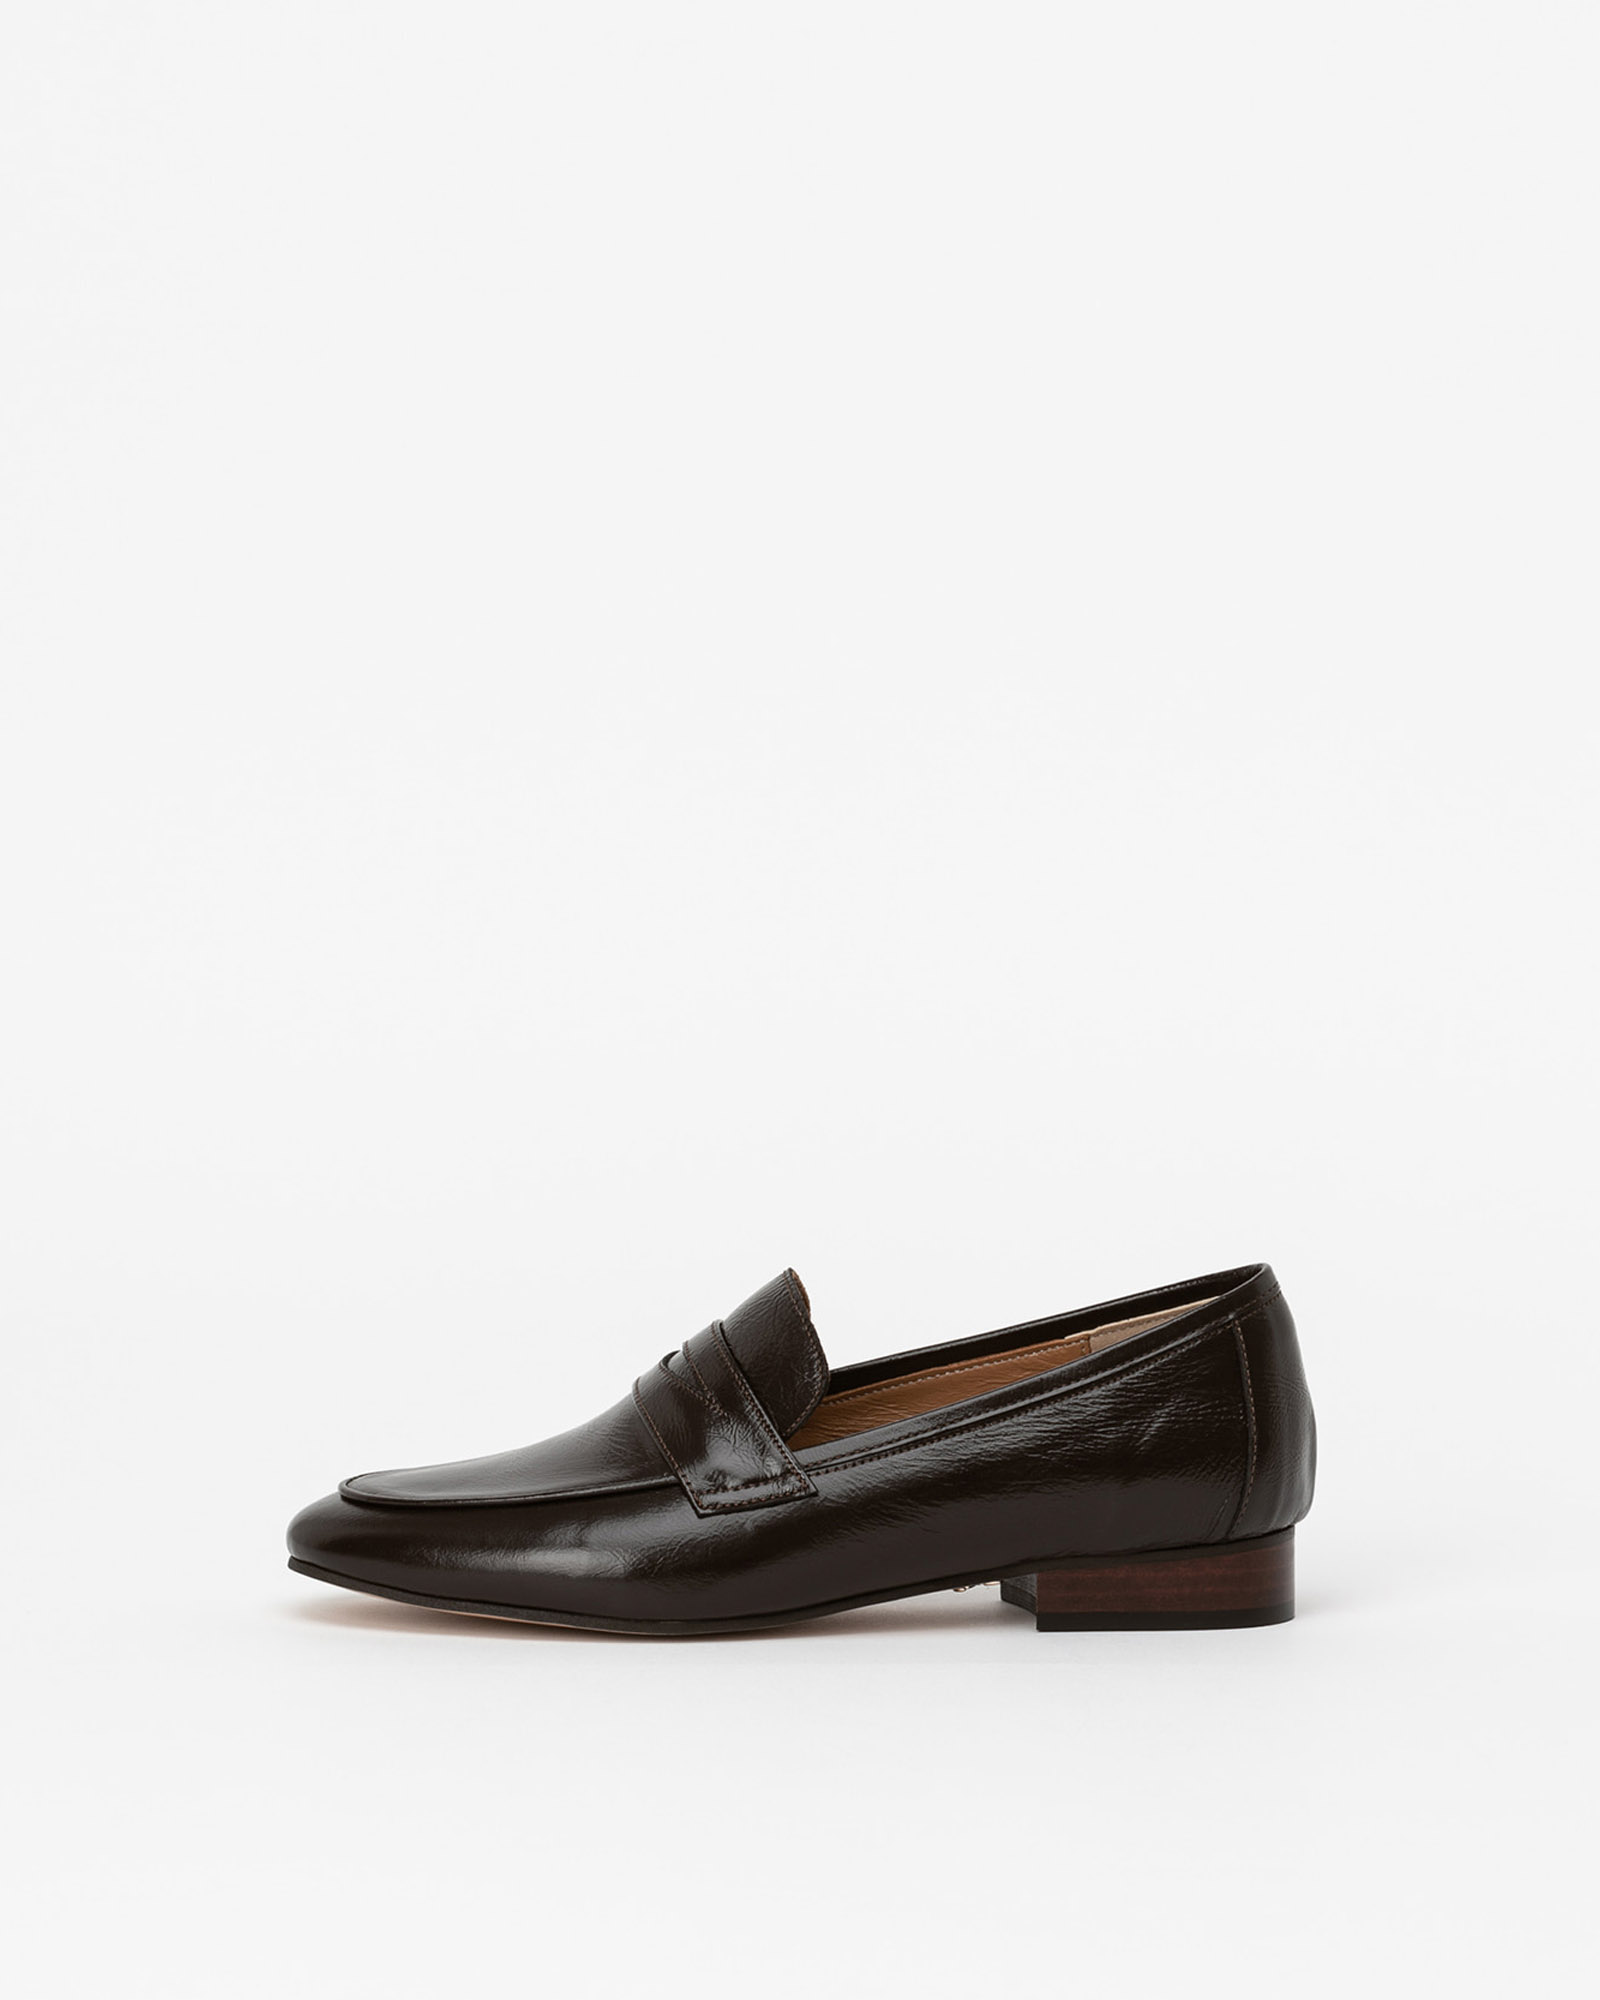 Sante Soft Loafers in Wrinkled Chocolate Brown